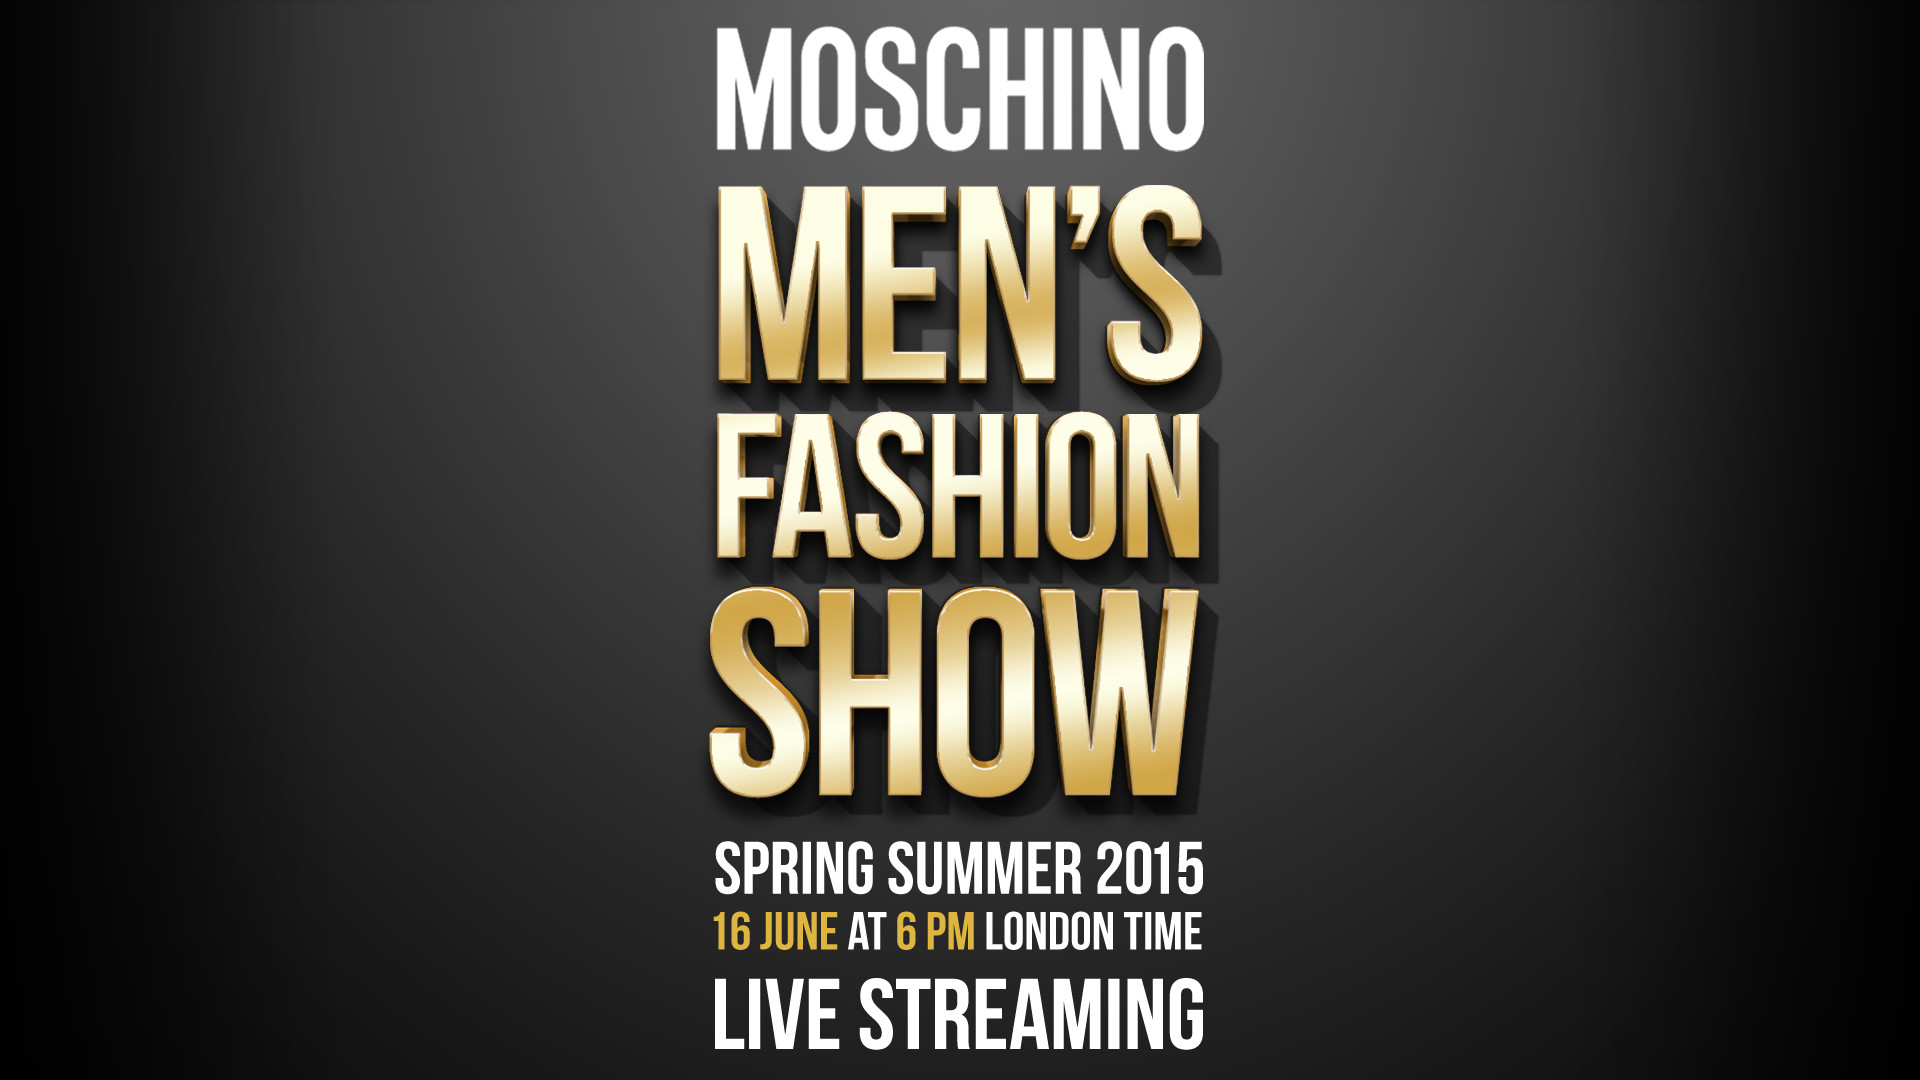 Moschino Spring Summer 2015 Men's Fashion Show Live Streaming 16th June 6pm London